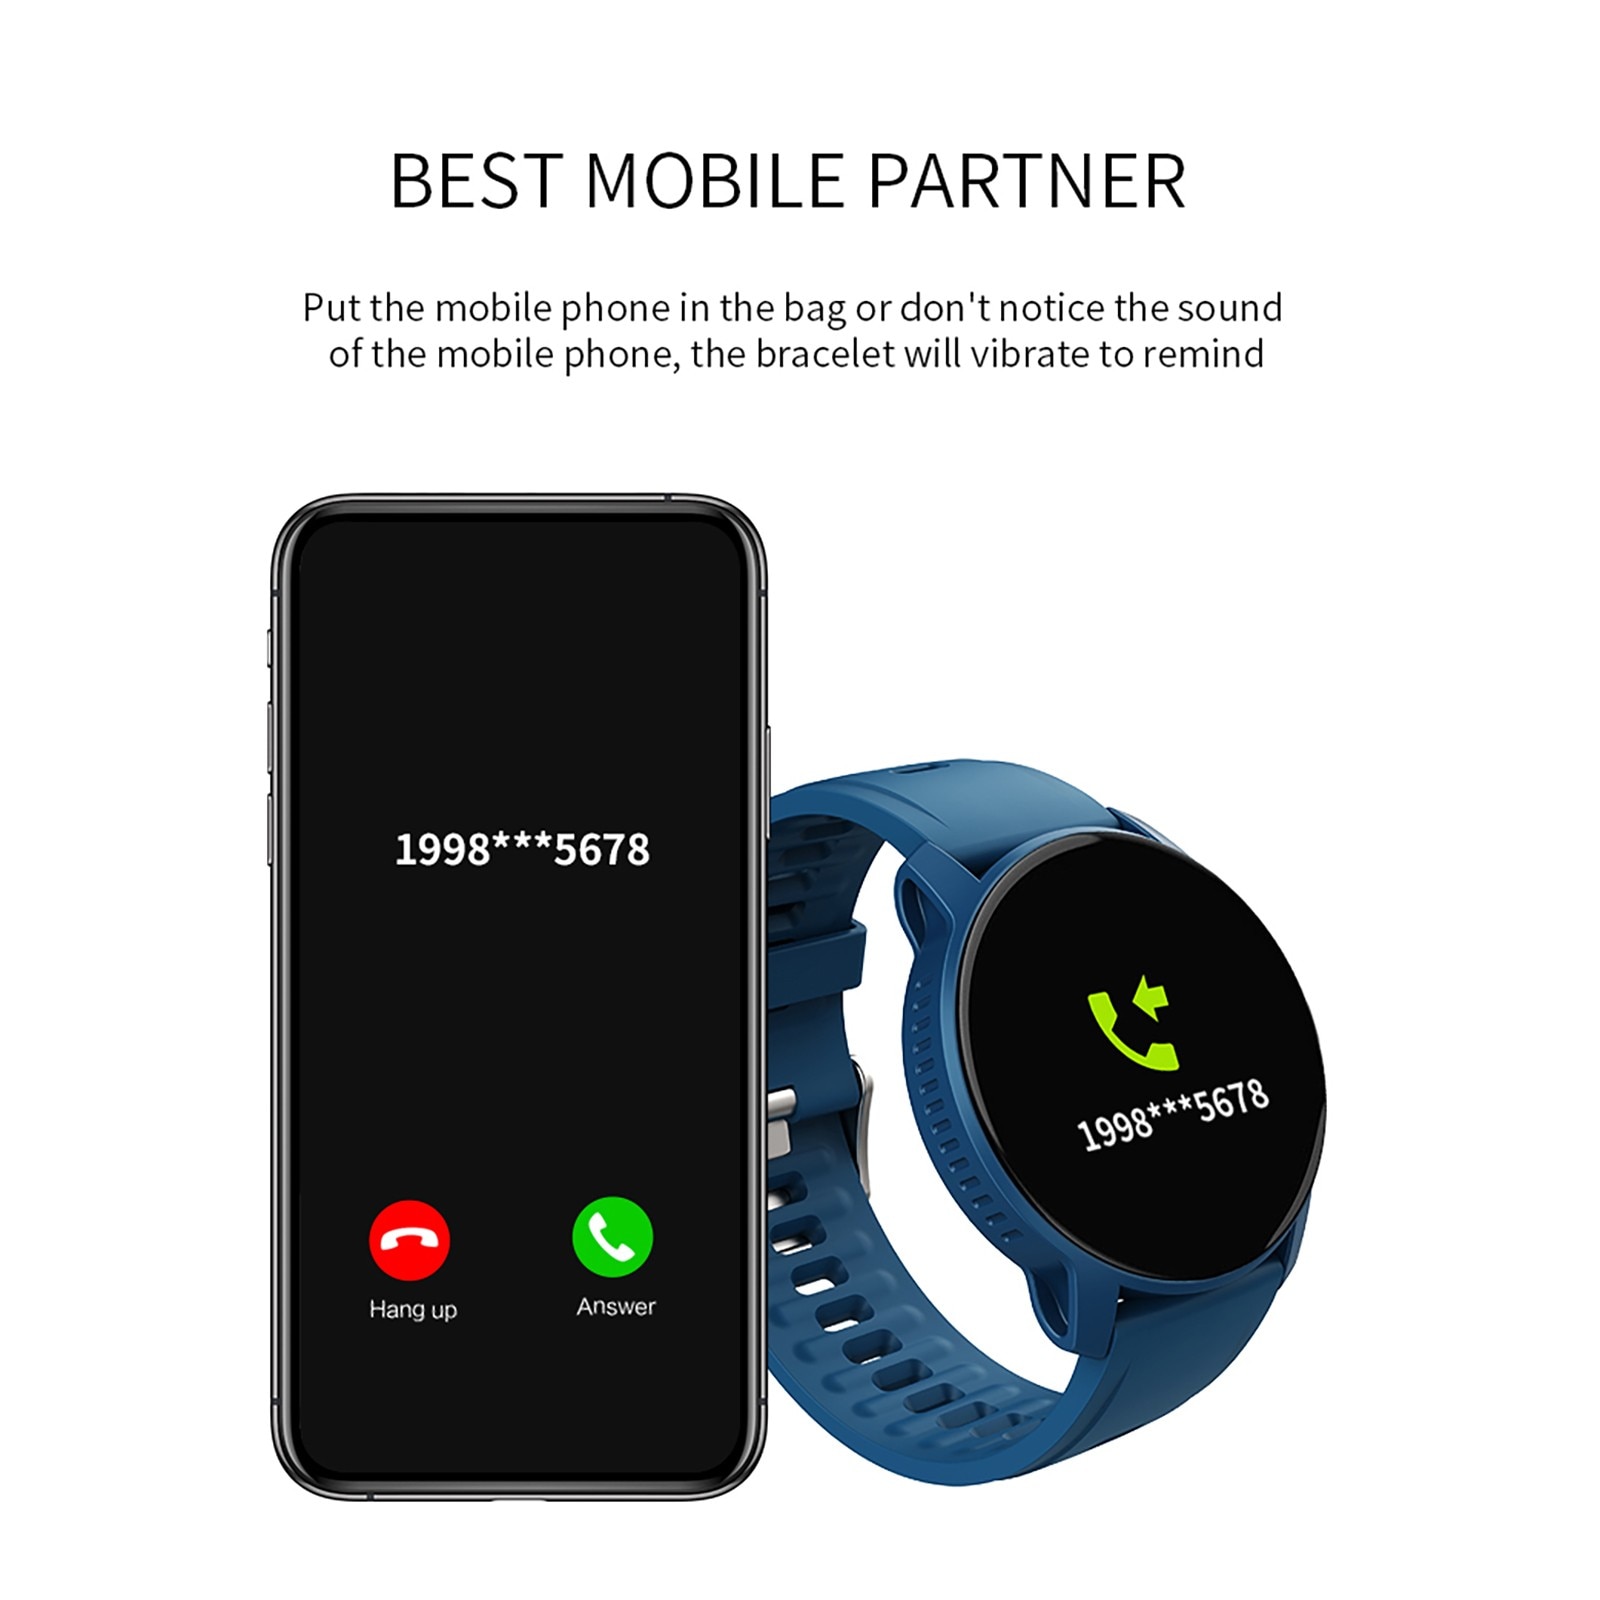 Fit Bot 2 High-definition 1.3 Large Smart Call 2.5D W9 Watch Bluetooth Screen Inch Smart watch Active 2 Stainless Steel 40mm